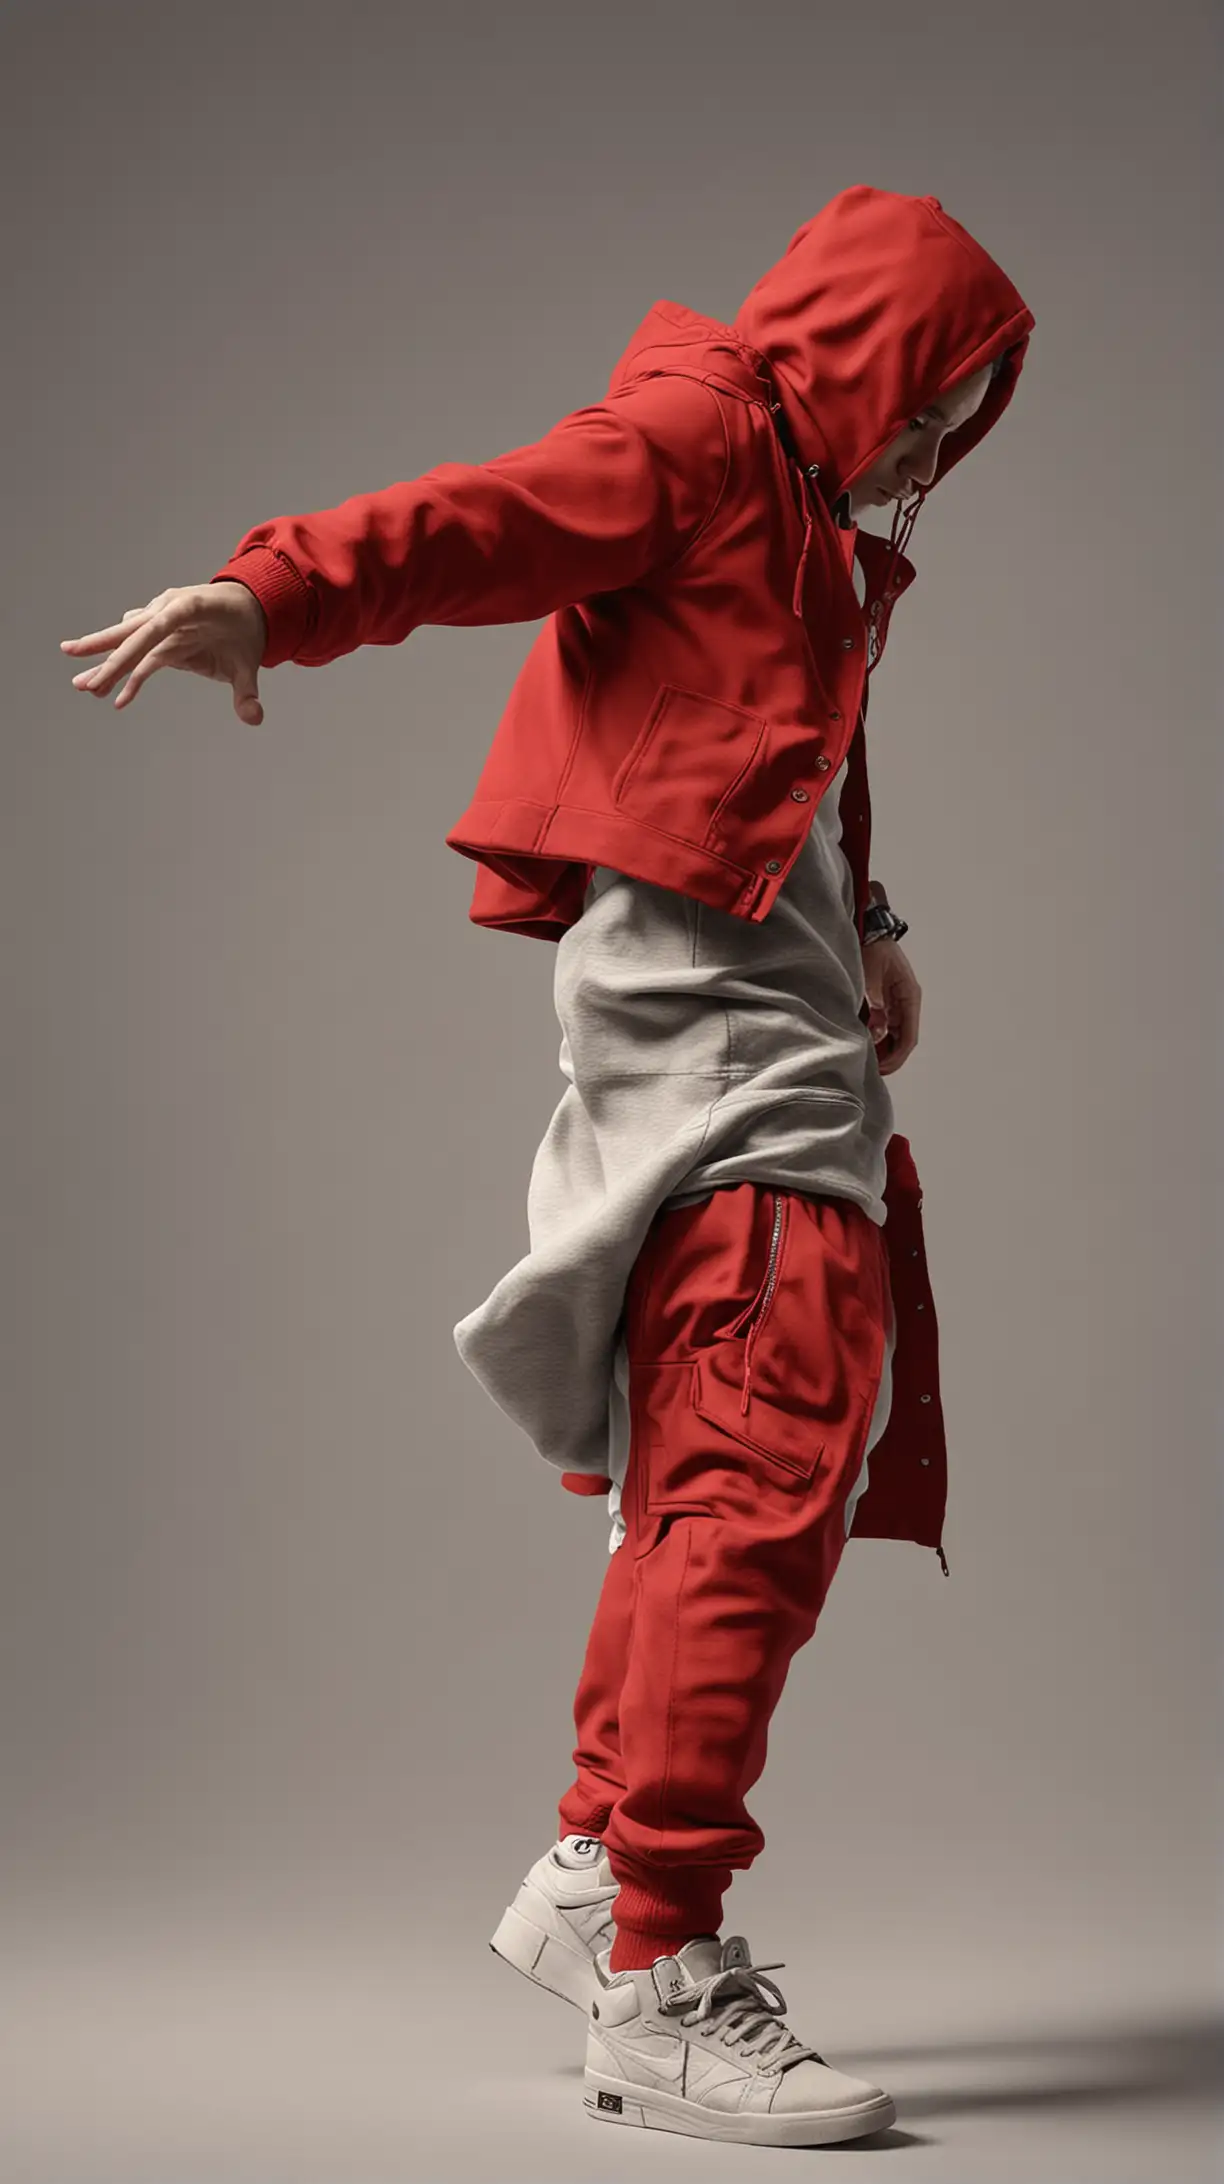 Breakdancer in Red Coat Performing on Solid Background